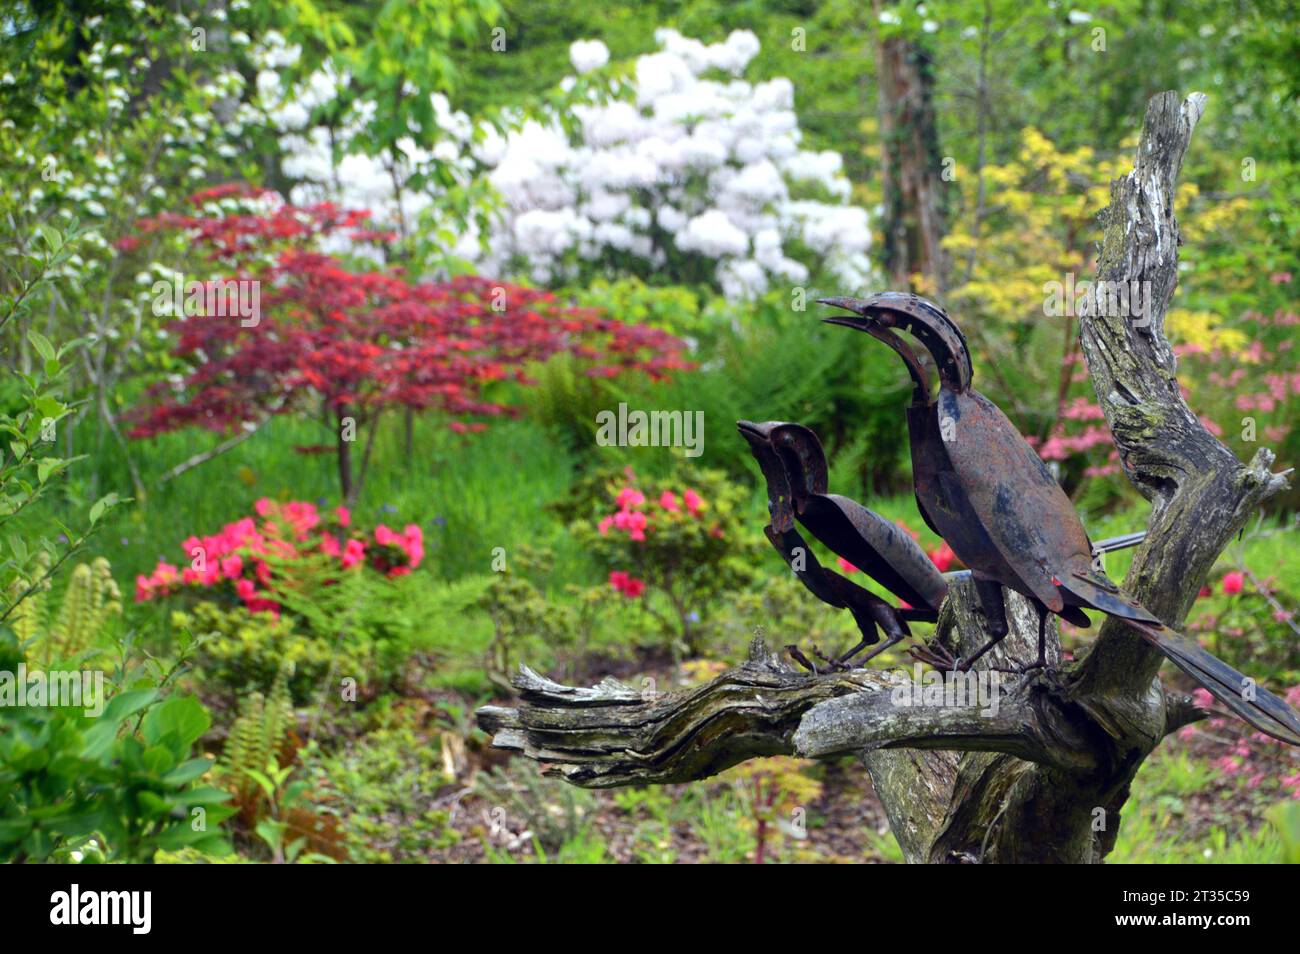 Pair of Metal Magpies on a Dead Tree by Sculptor Helen Denerley in the Himalayan Garden & Sculpture Park, North Yorkshire, England, UK. Stock Photo